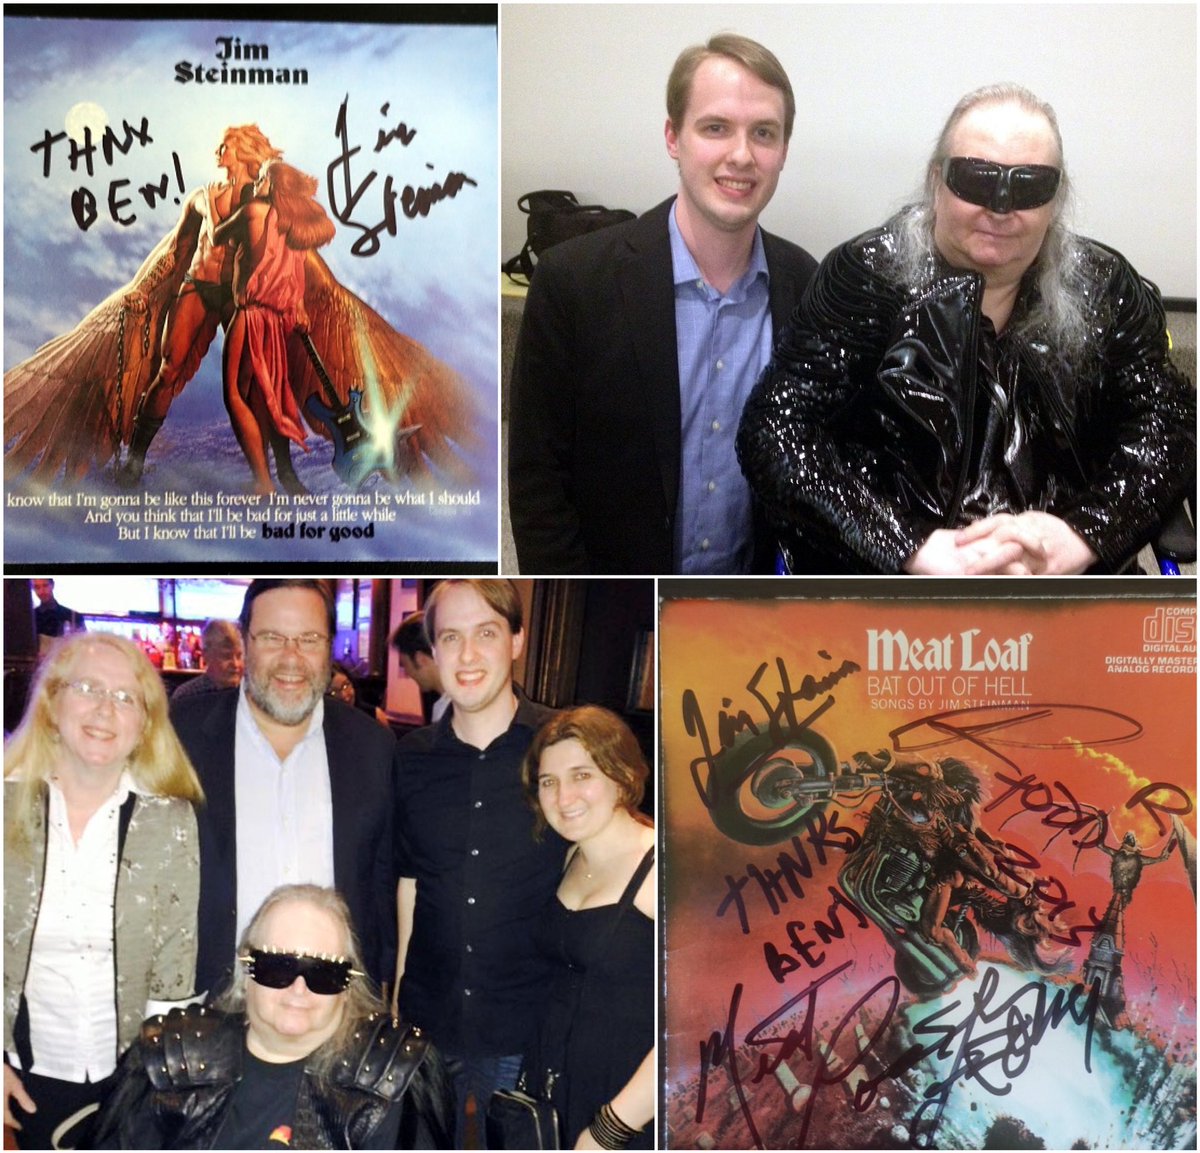 1 year since the world lost the genius that is #JimSteinman